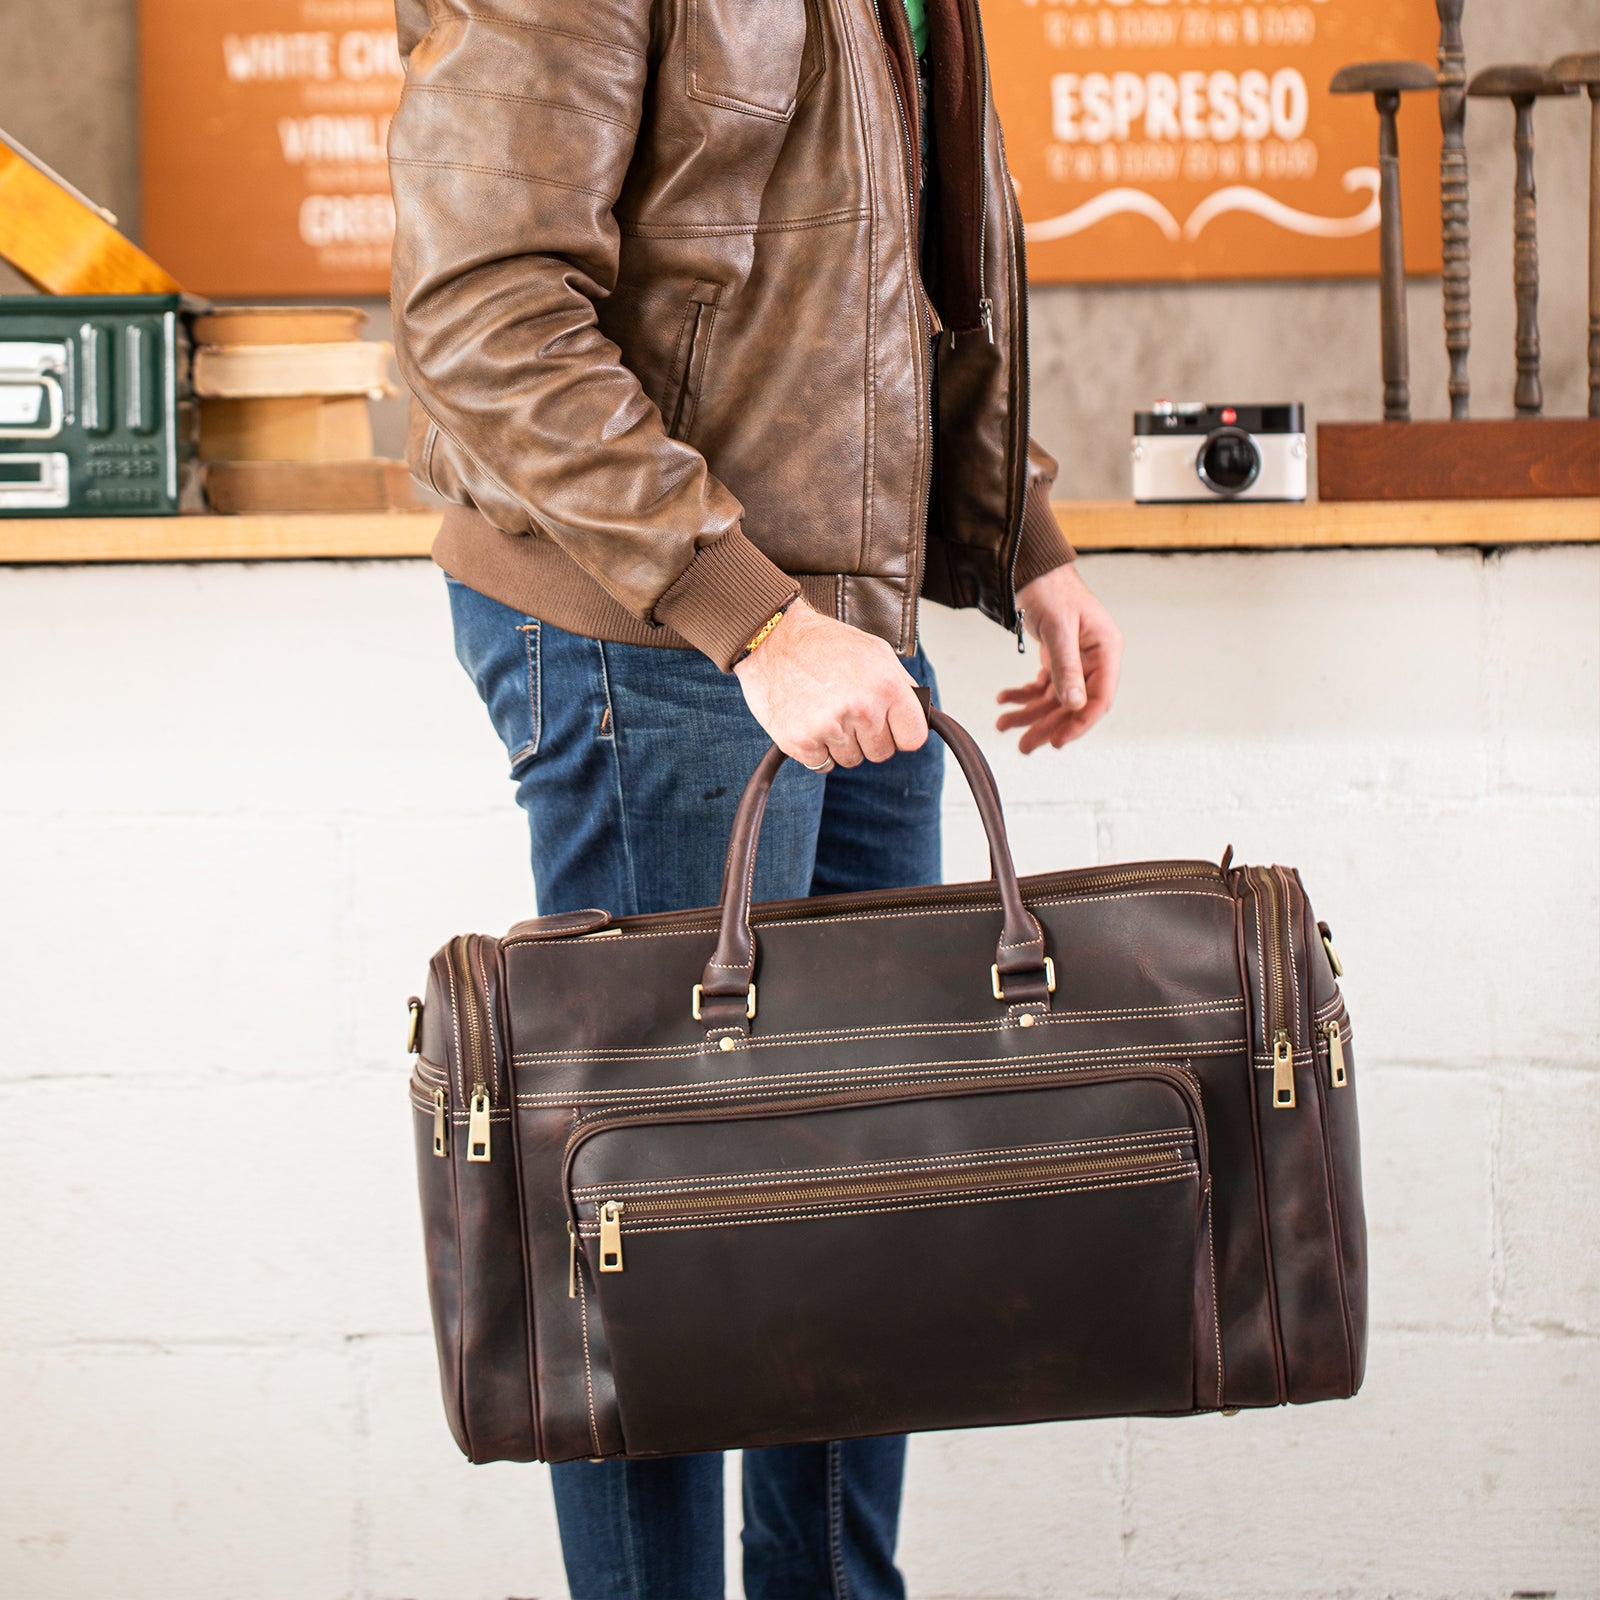 Patent Duffle Bags – Tote&Carry